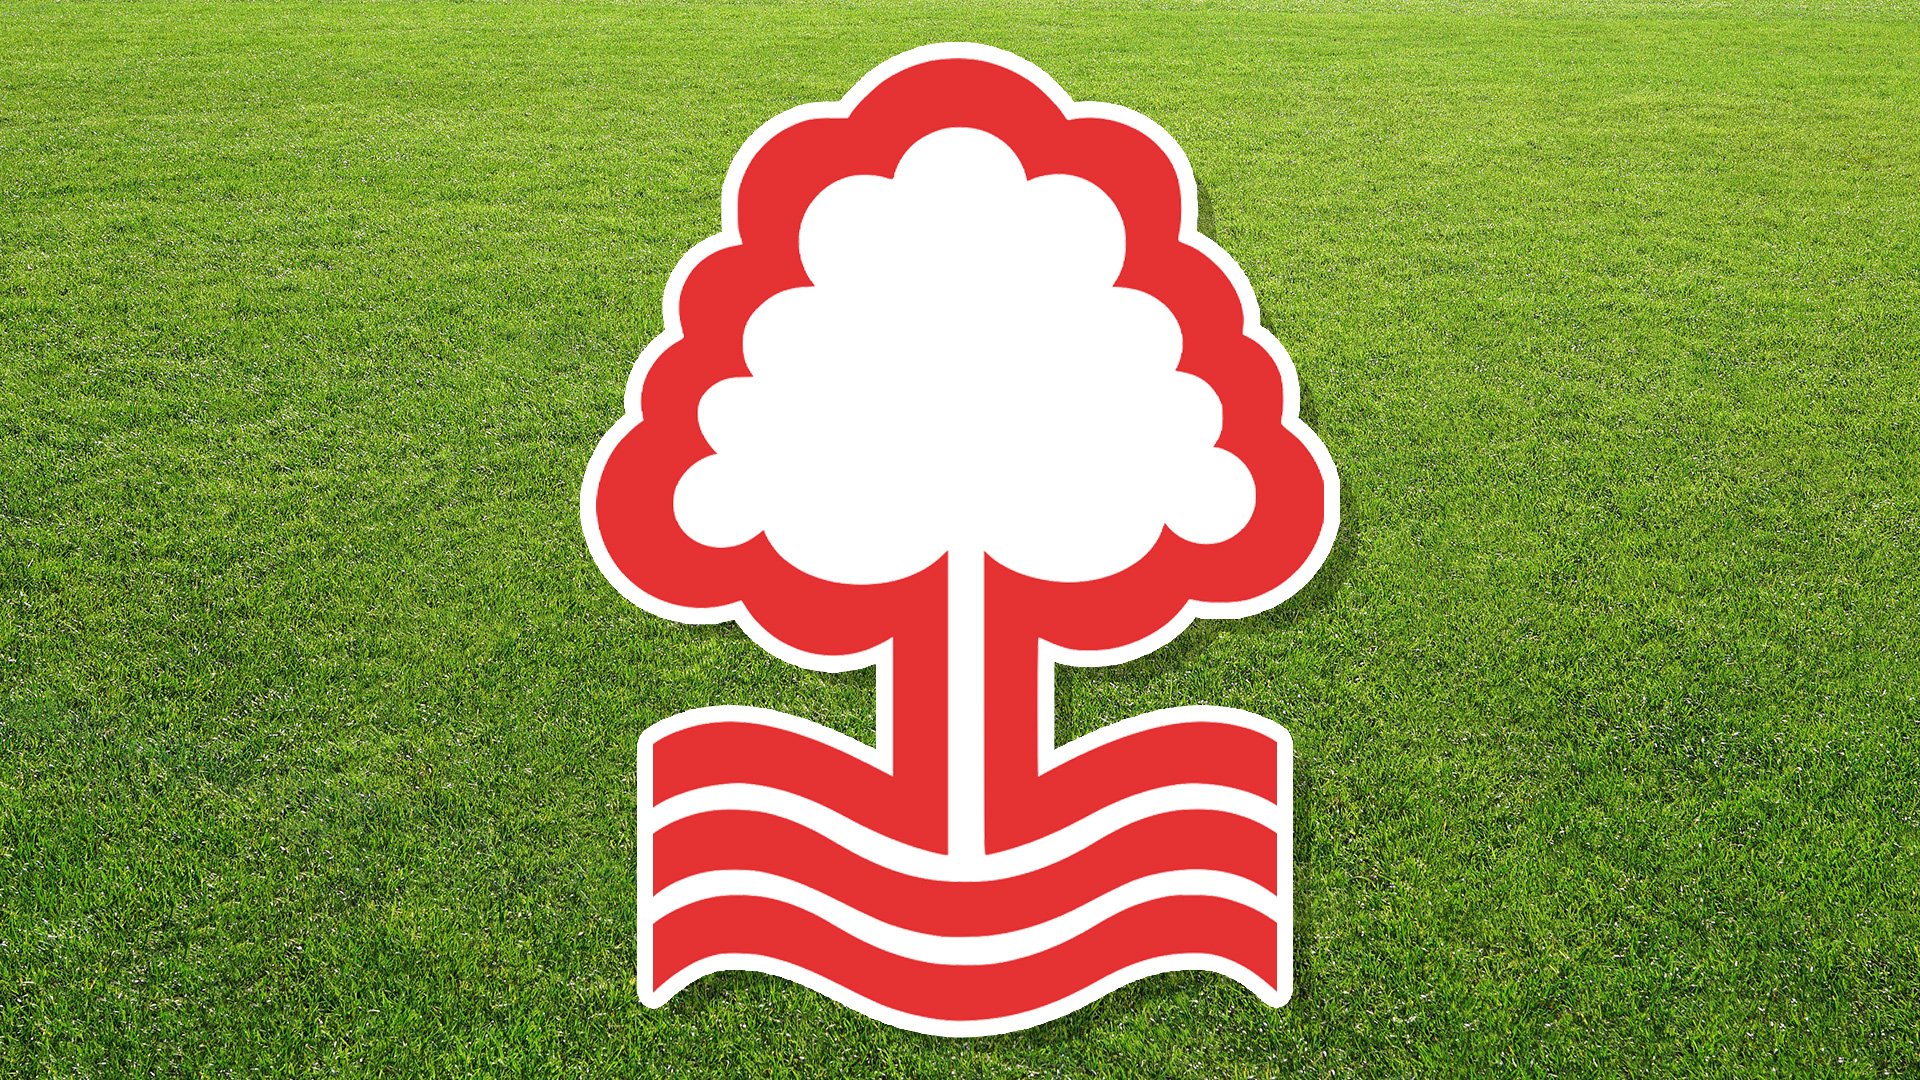 A football badge featuring a tree